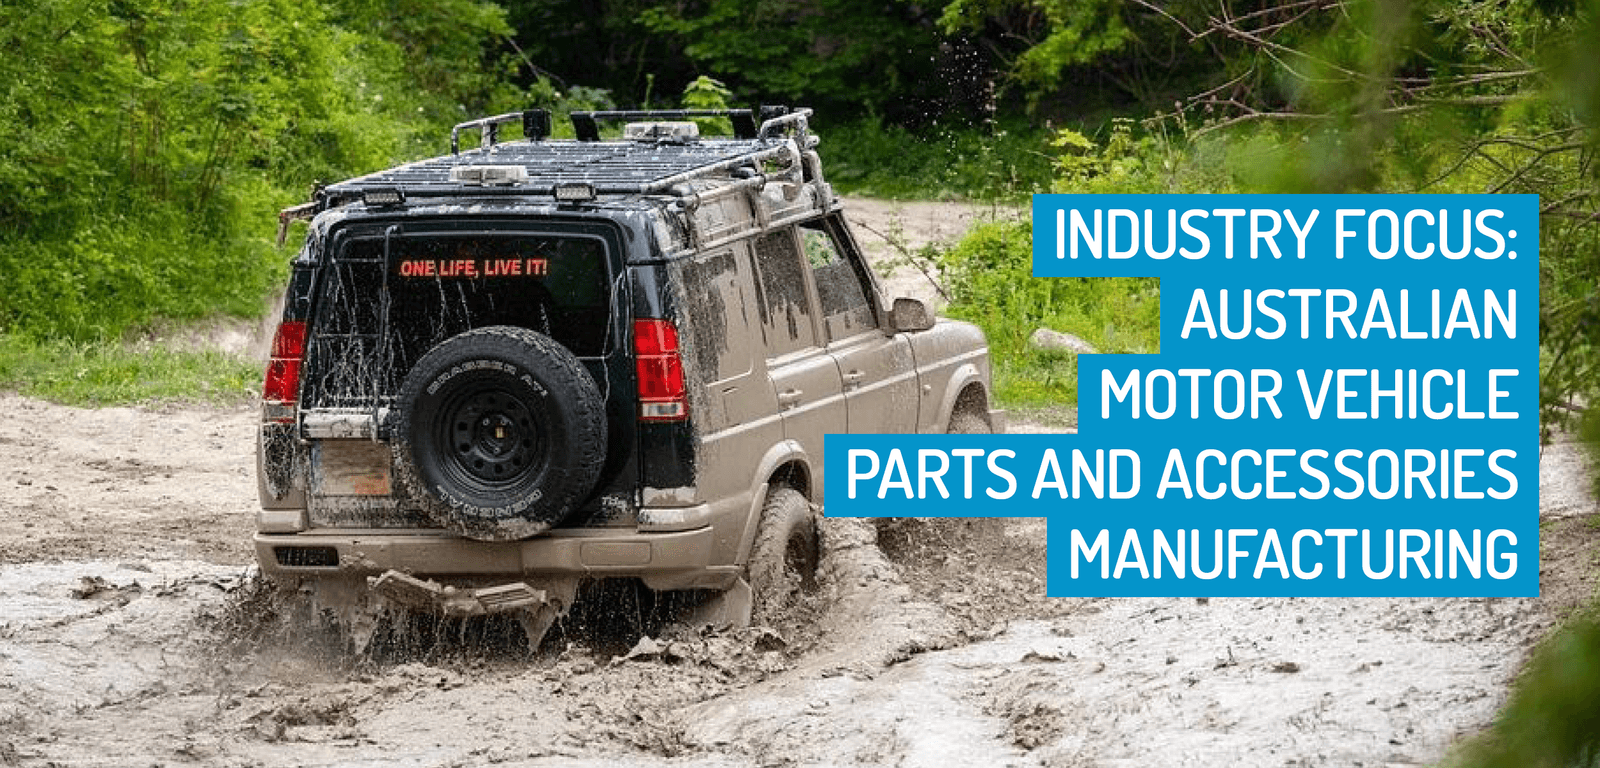 Industry Focus: Australian Motor Vehicle Parts and Accessories Manufacturing